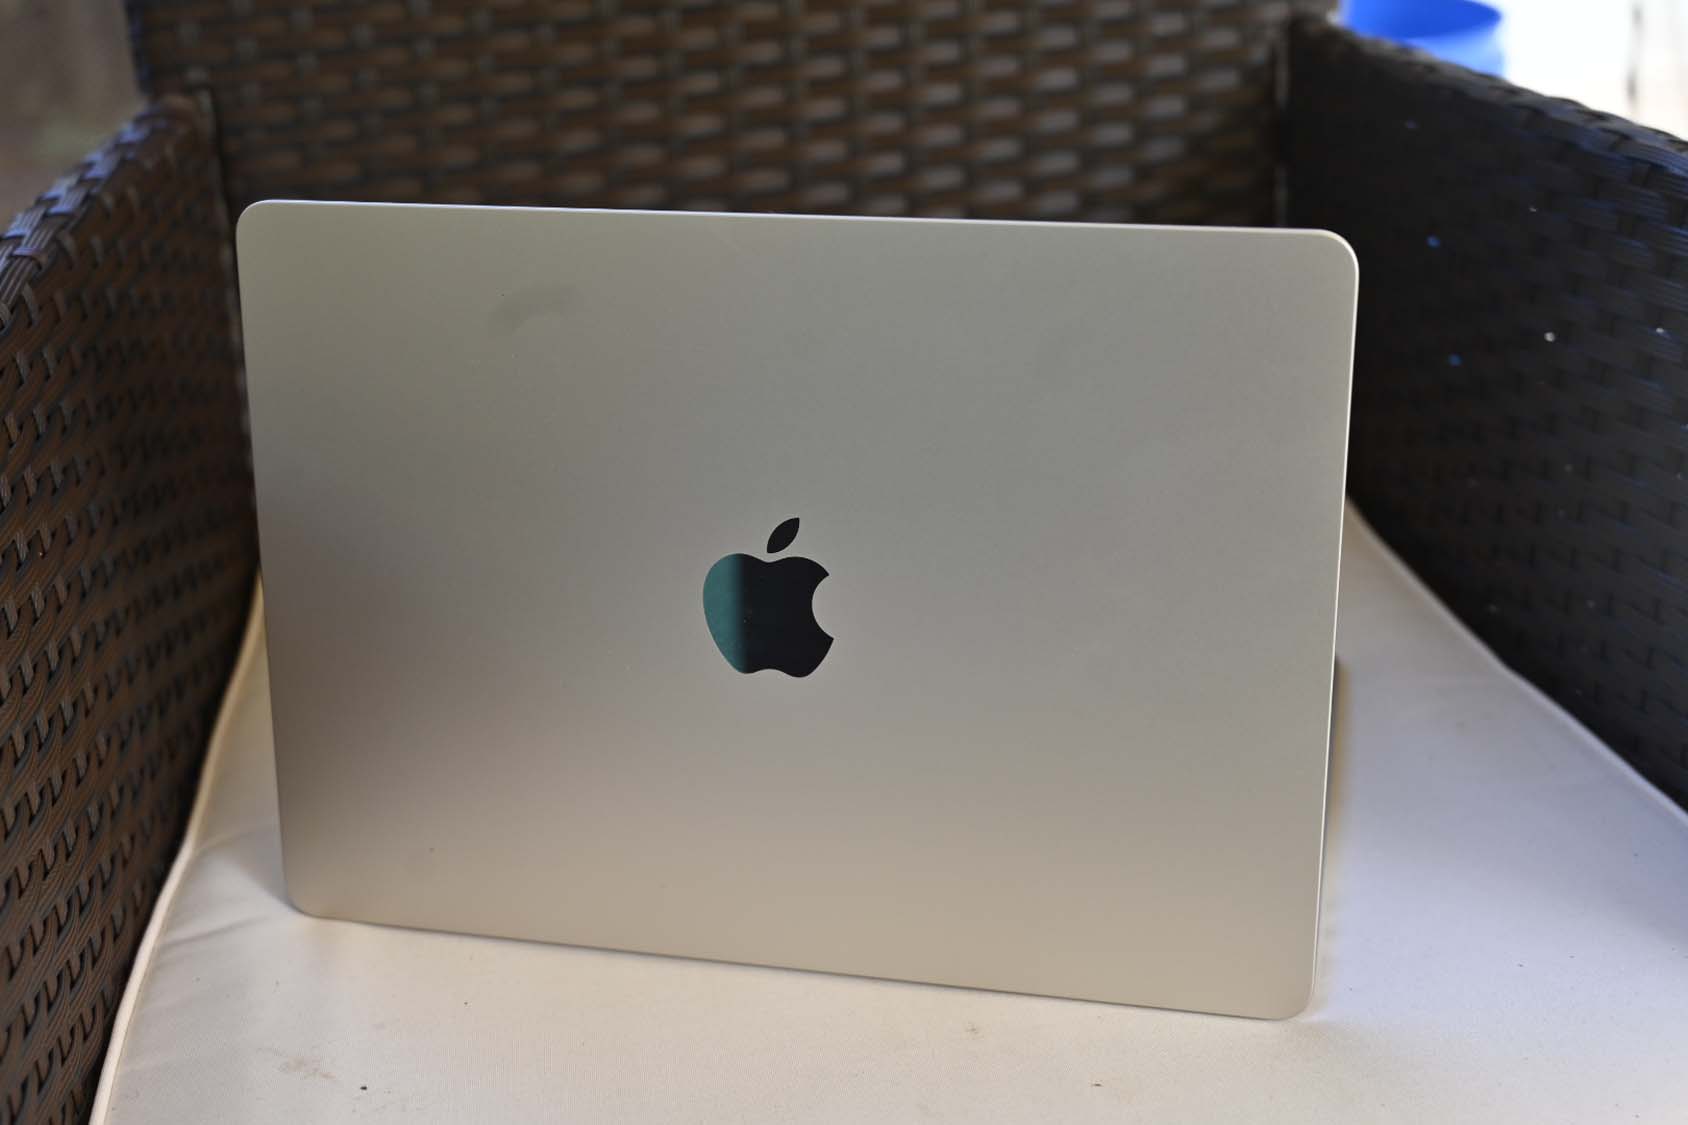 Buy 13-inch MacBook Air with M2 Chip - Apple